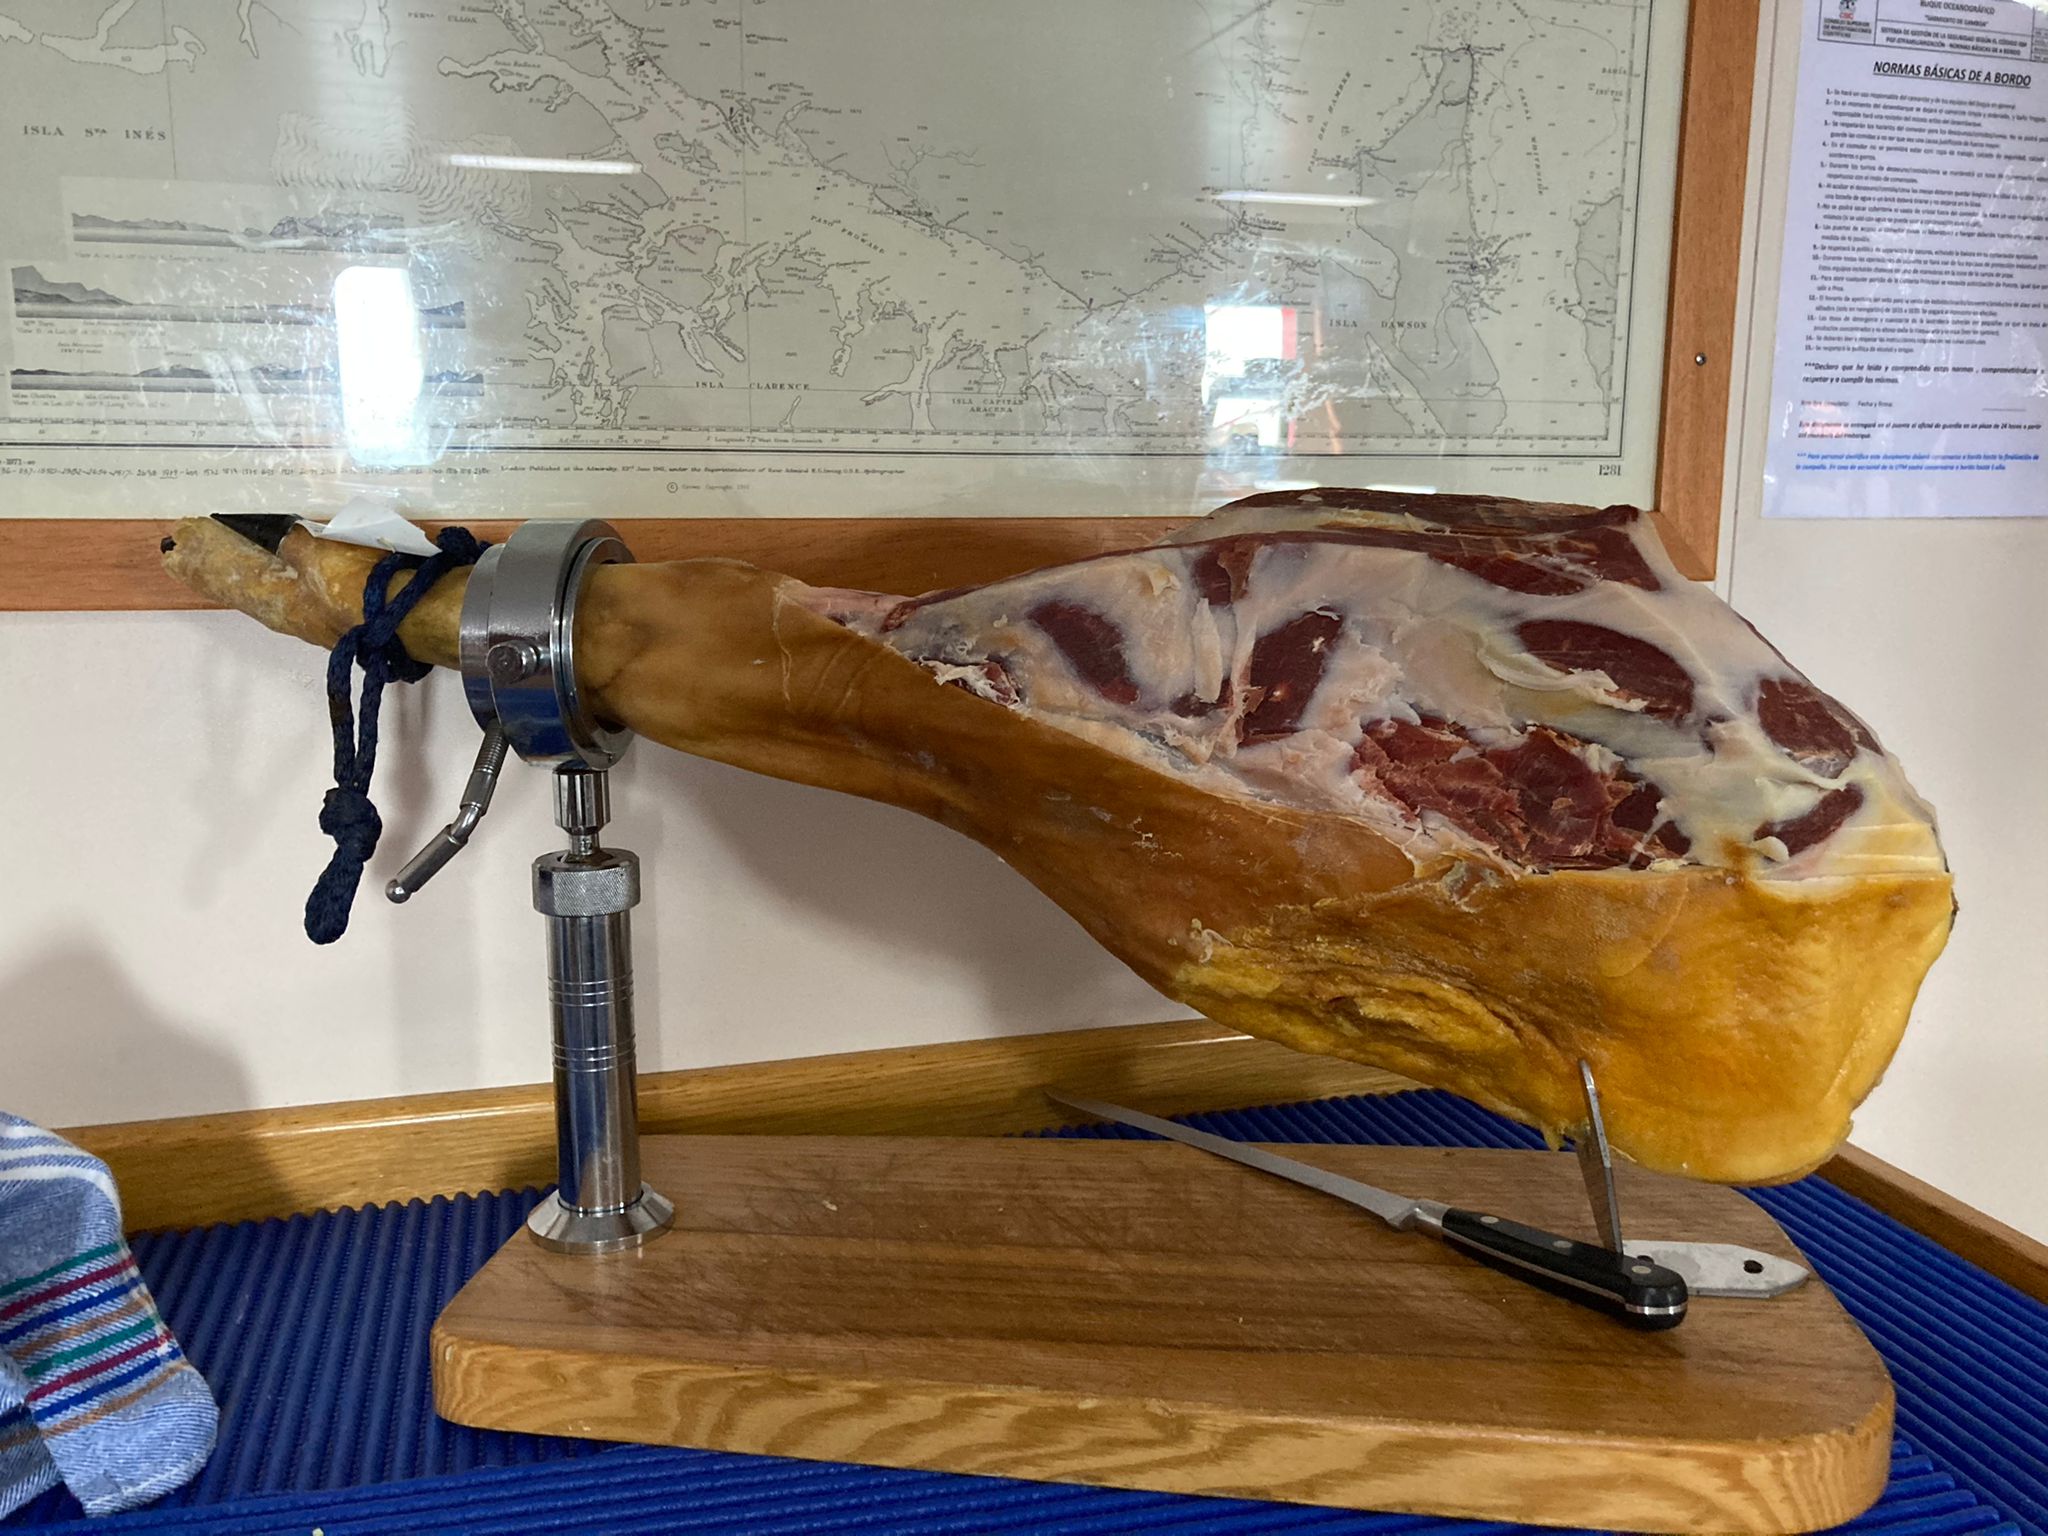 Jamón, or dry-cured ham, is served Spanish style during pinchos, or snacktime! Photo by Michelle Cusolito, @Woods Hole Oceanographic Institution